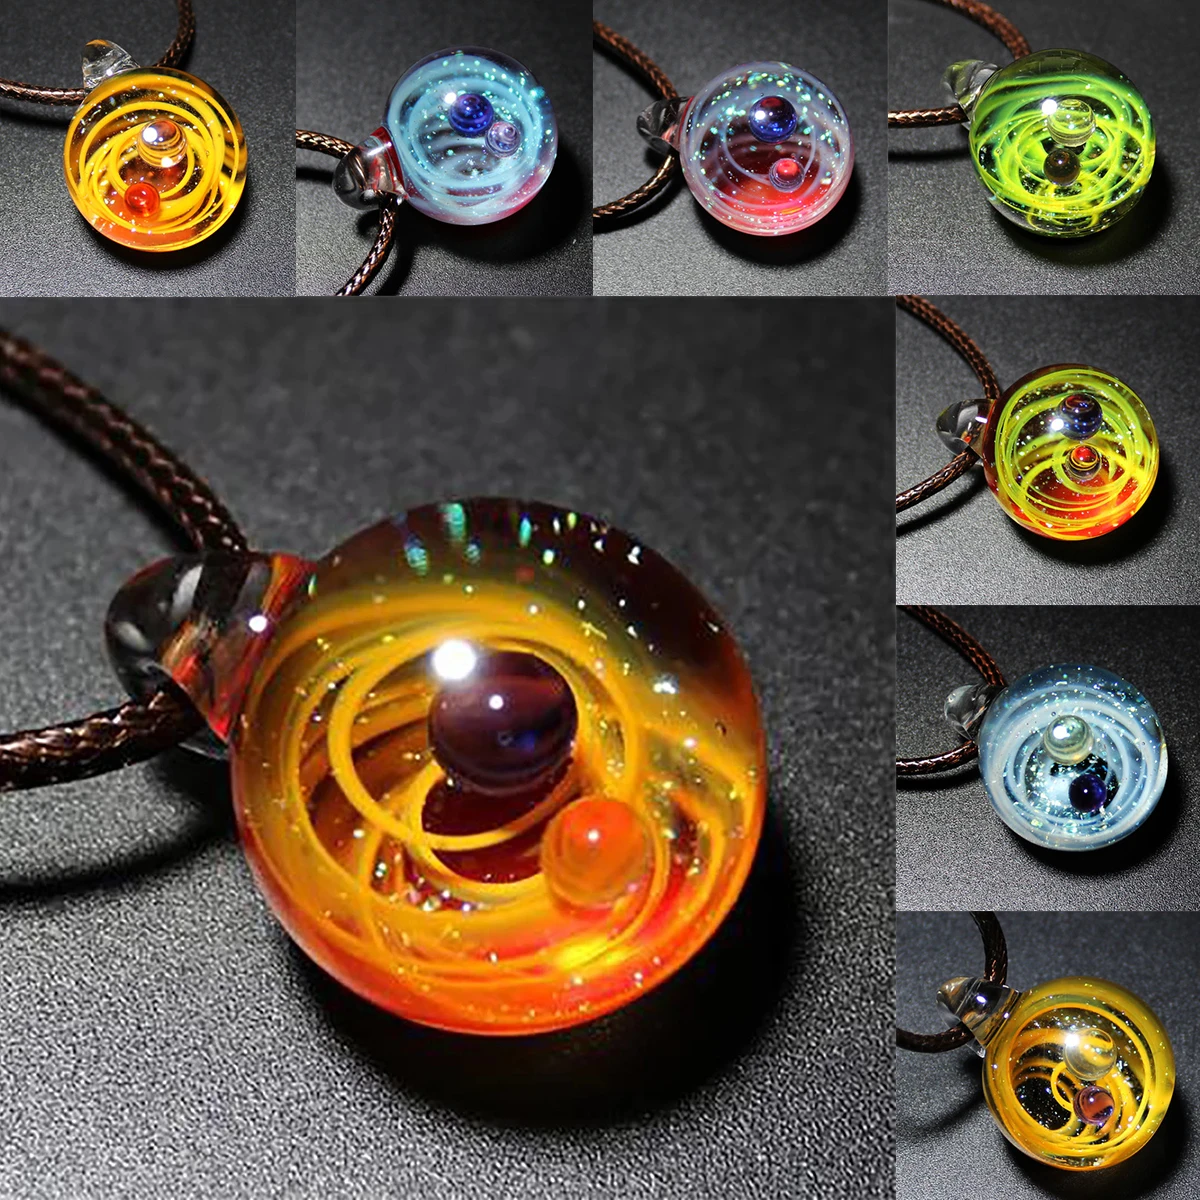 Nebula Cosmic Handmade Galaxy Glass Pendant with Rope Necklace Universe Glass Bead Planets Jewelry Necklace for Women Gift